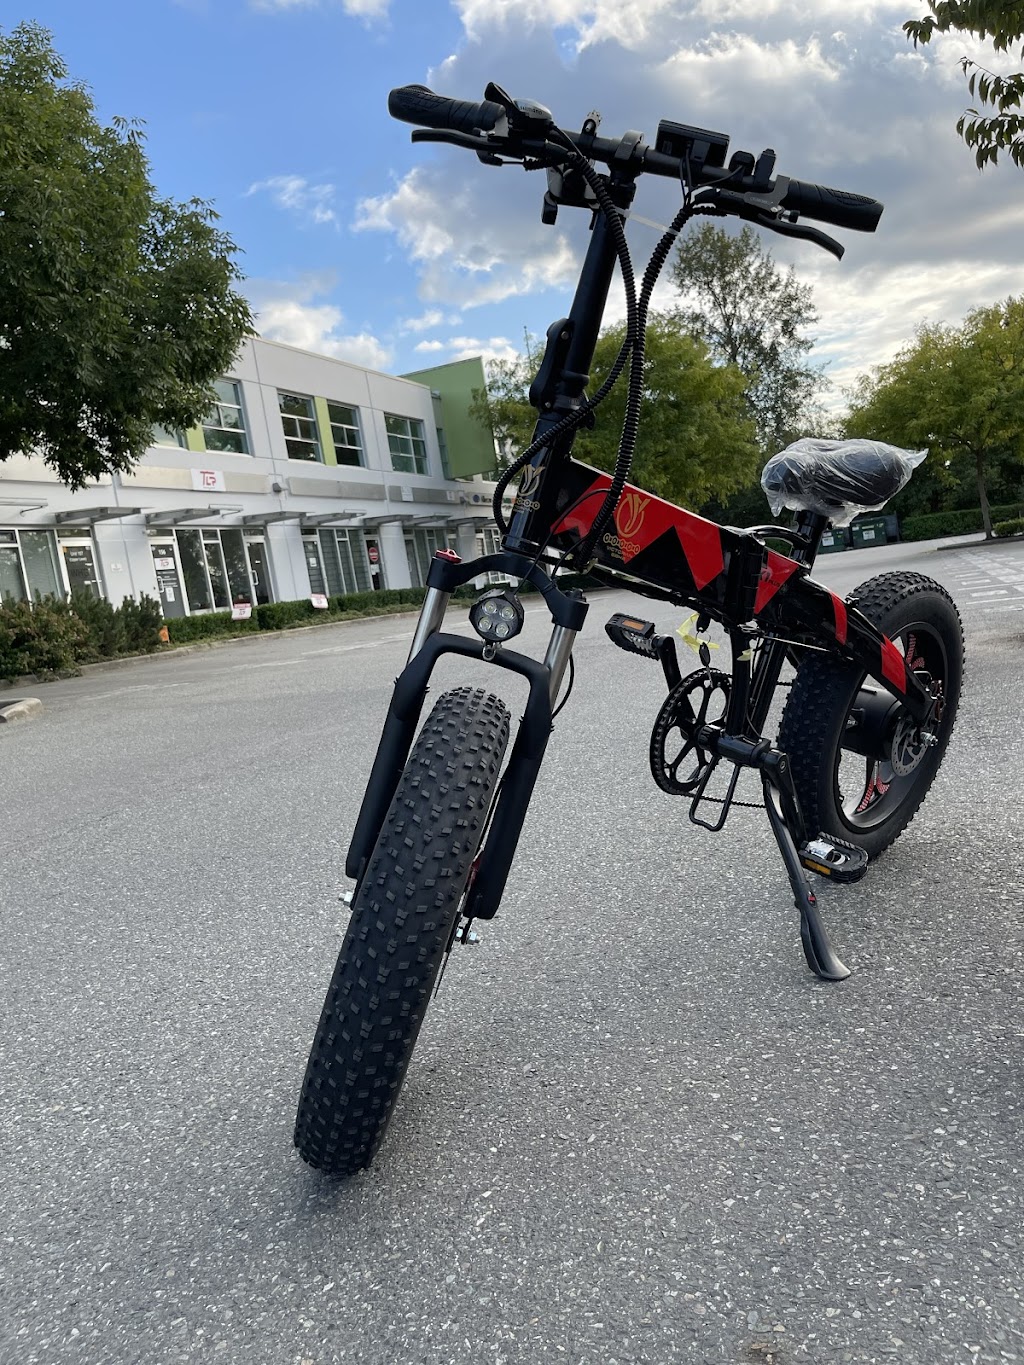 Victorian Ebike MPR | bicycle store | 27464 110 Ave, Maple Ridge, BC V2W 1P5, Canada | 7788598886 OR +1 778-859-8886